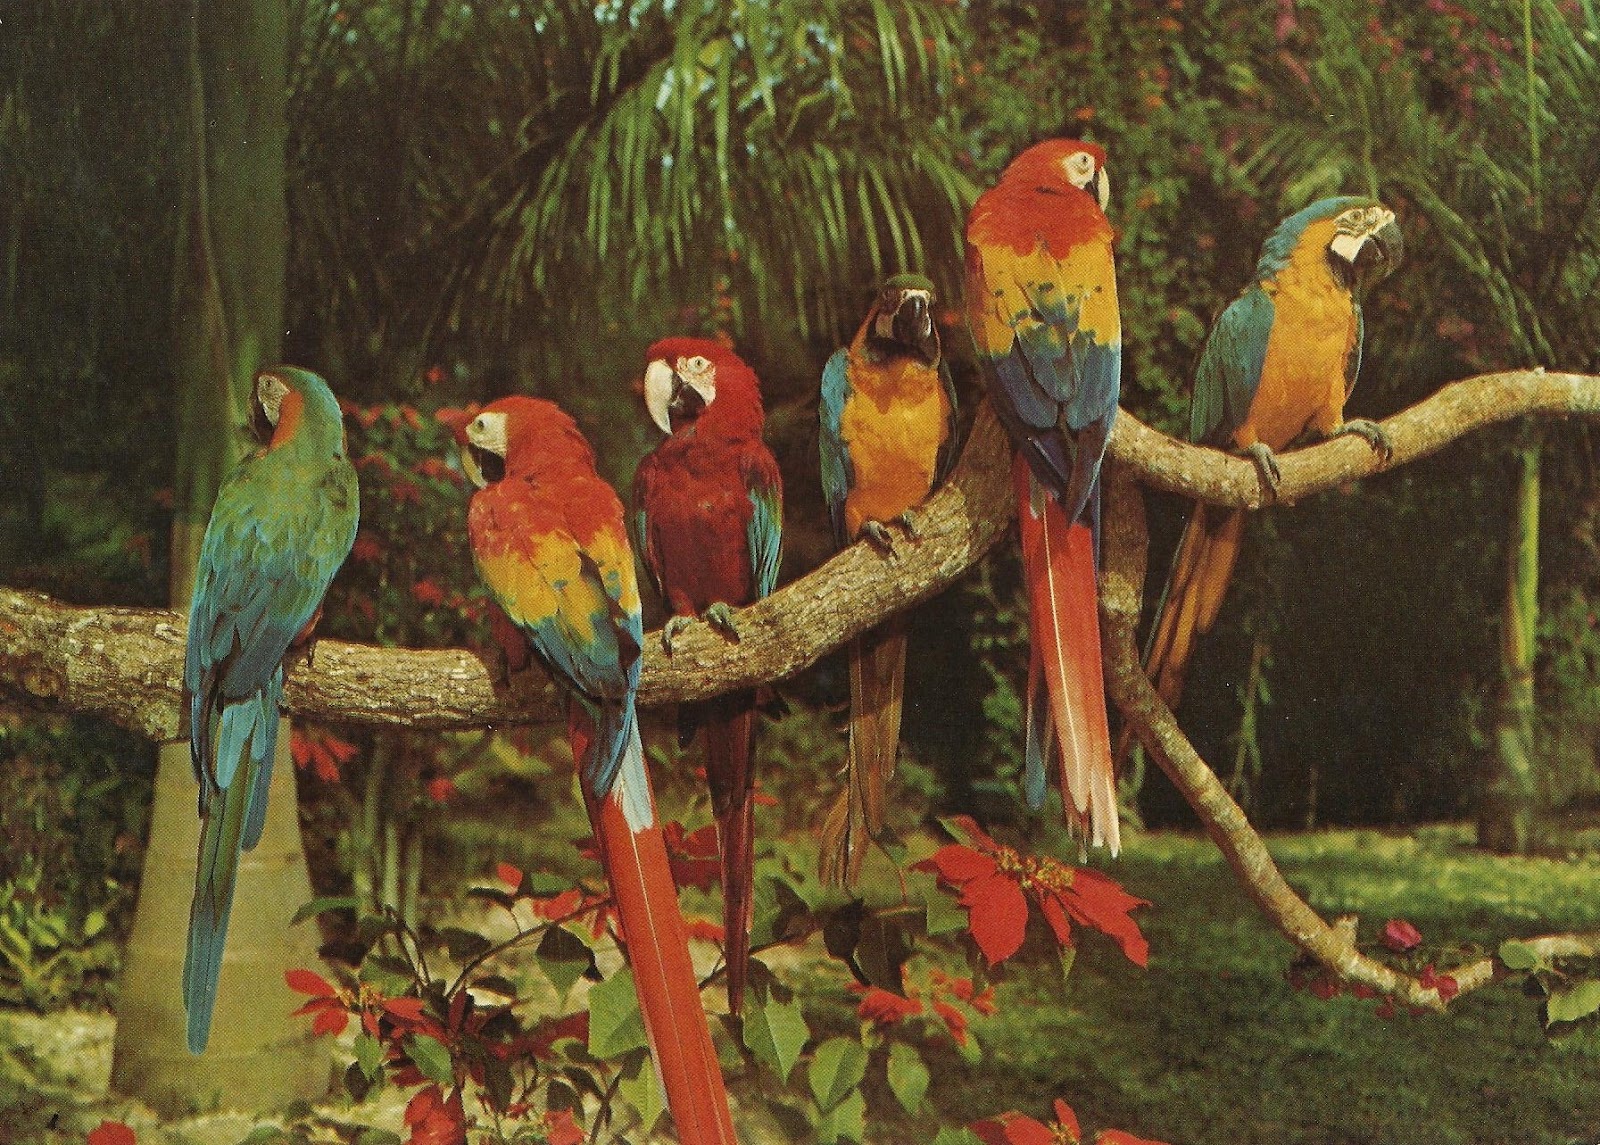 Download this Parrot Jungle Miami Natural Unspoiled Tropical Beauty picture